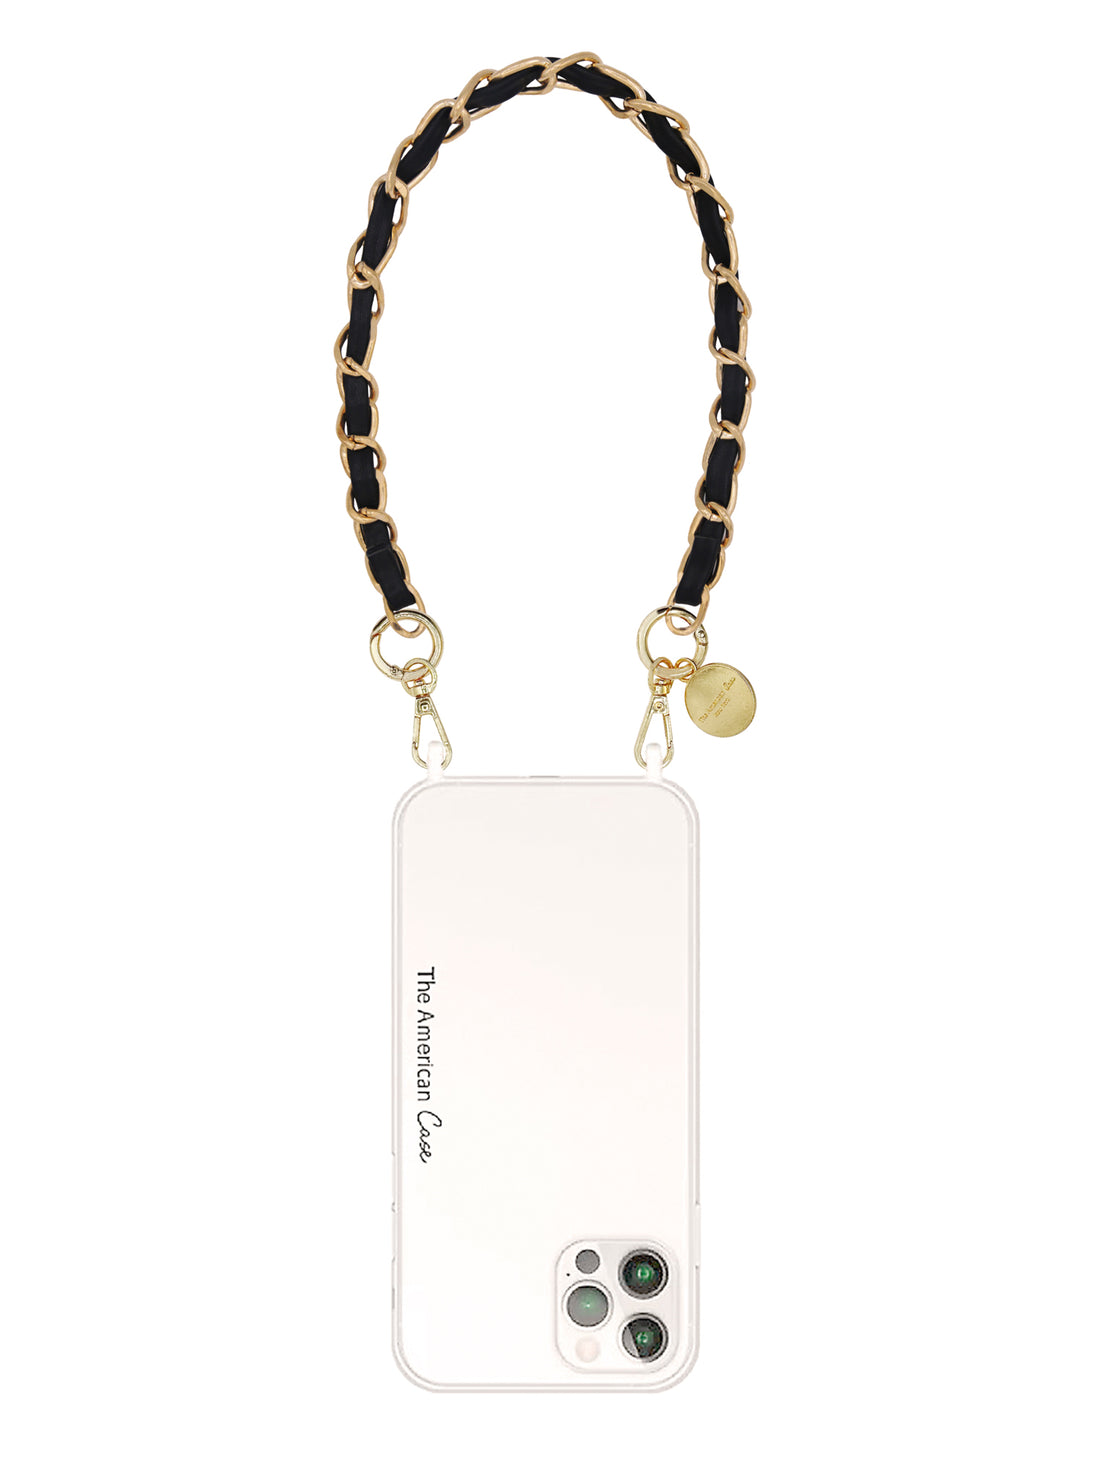 Kaitlyn - Metal and Leather bracelet phone chain with Golden Carabiners